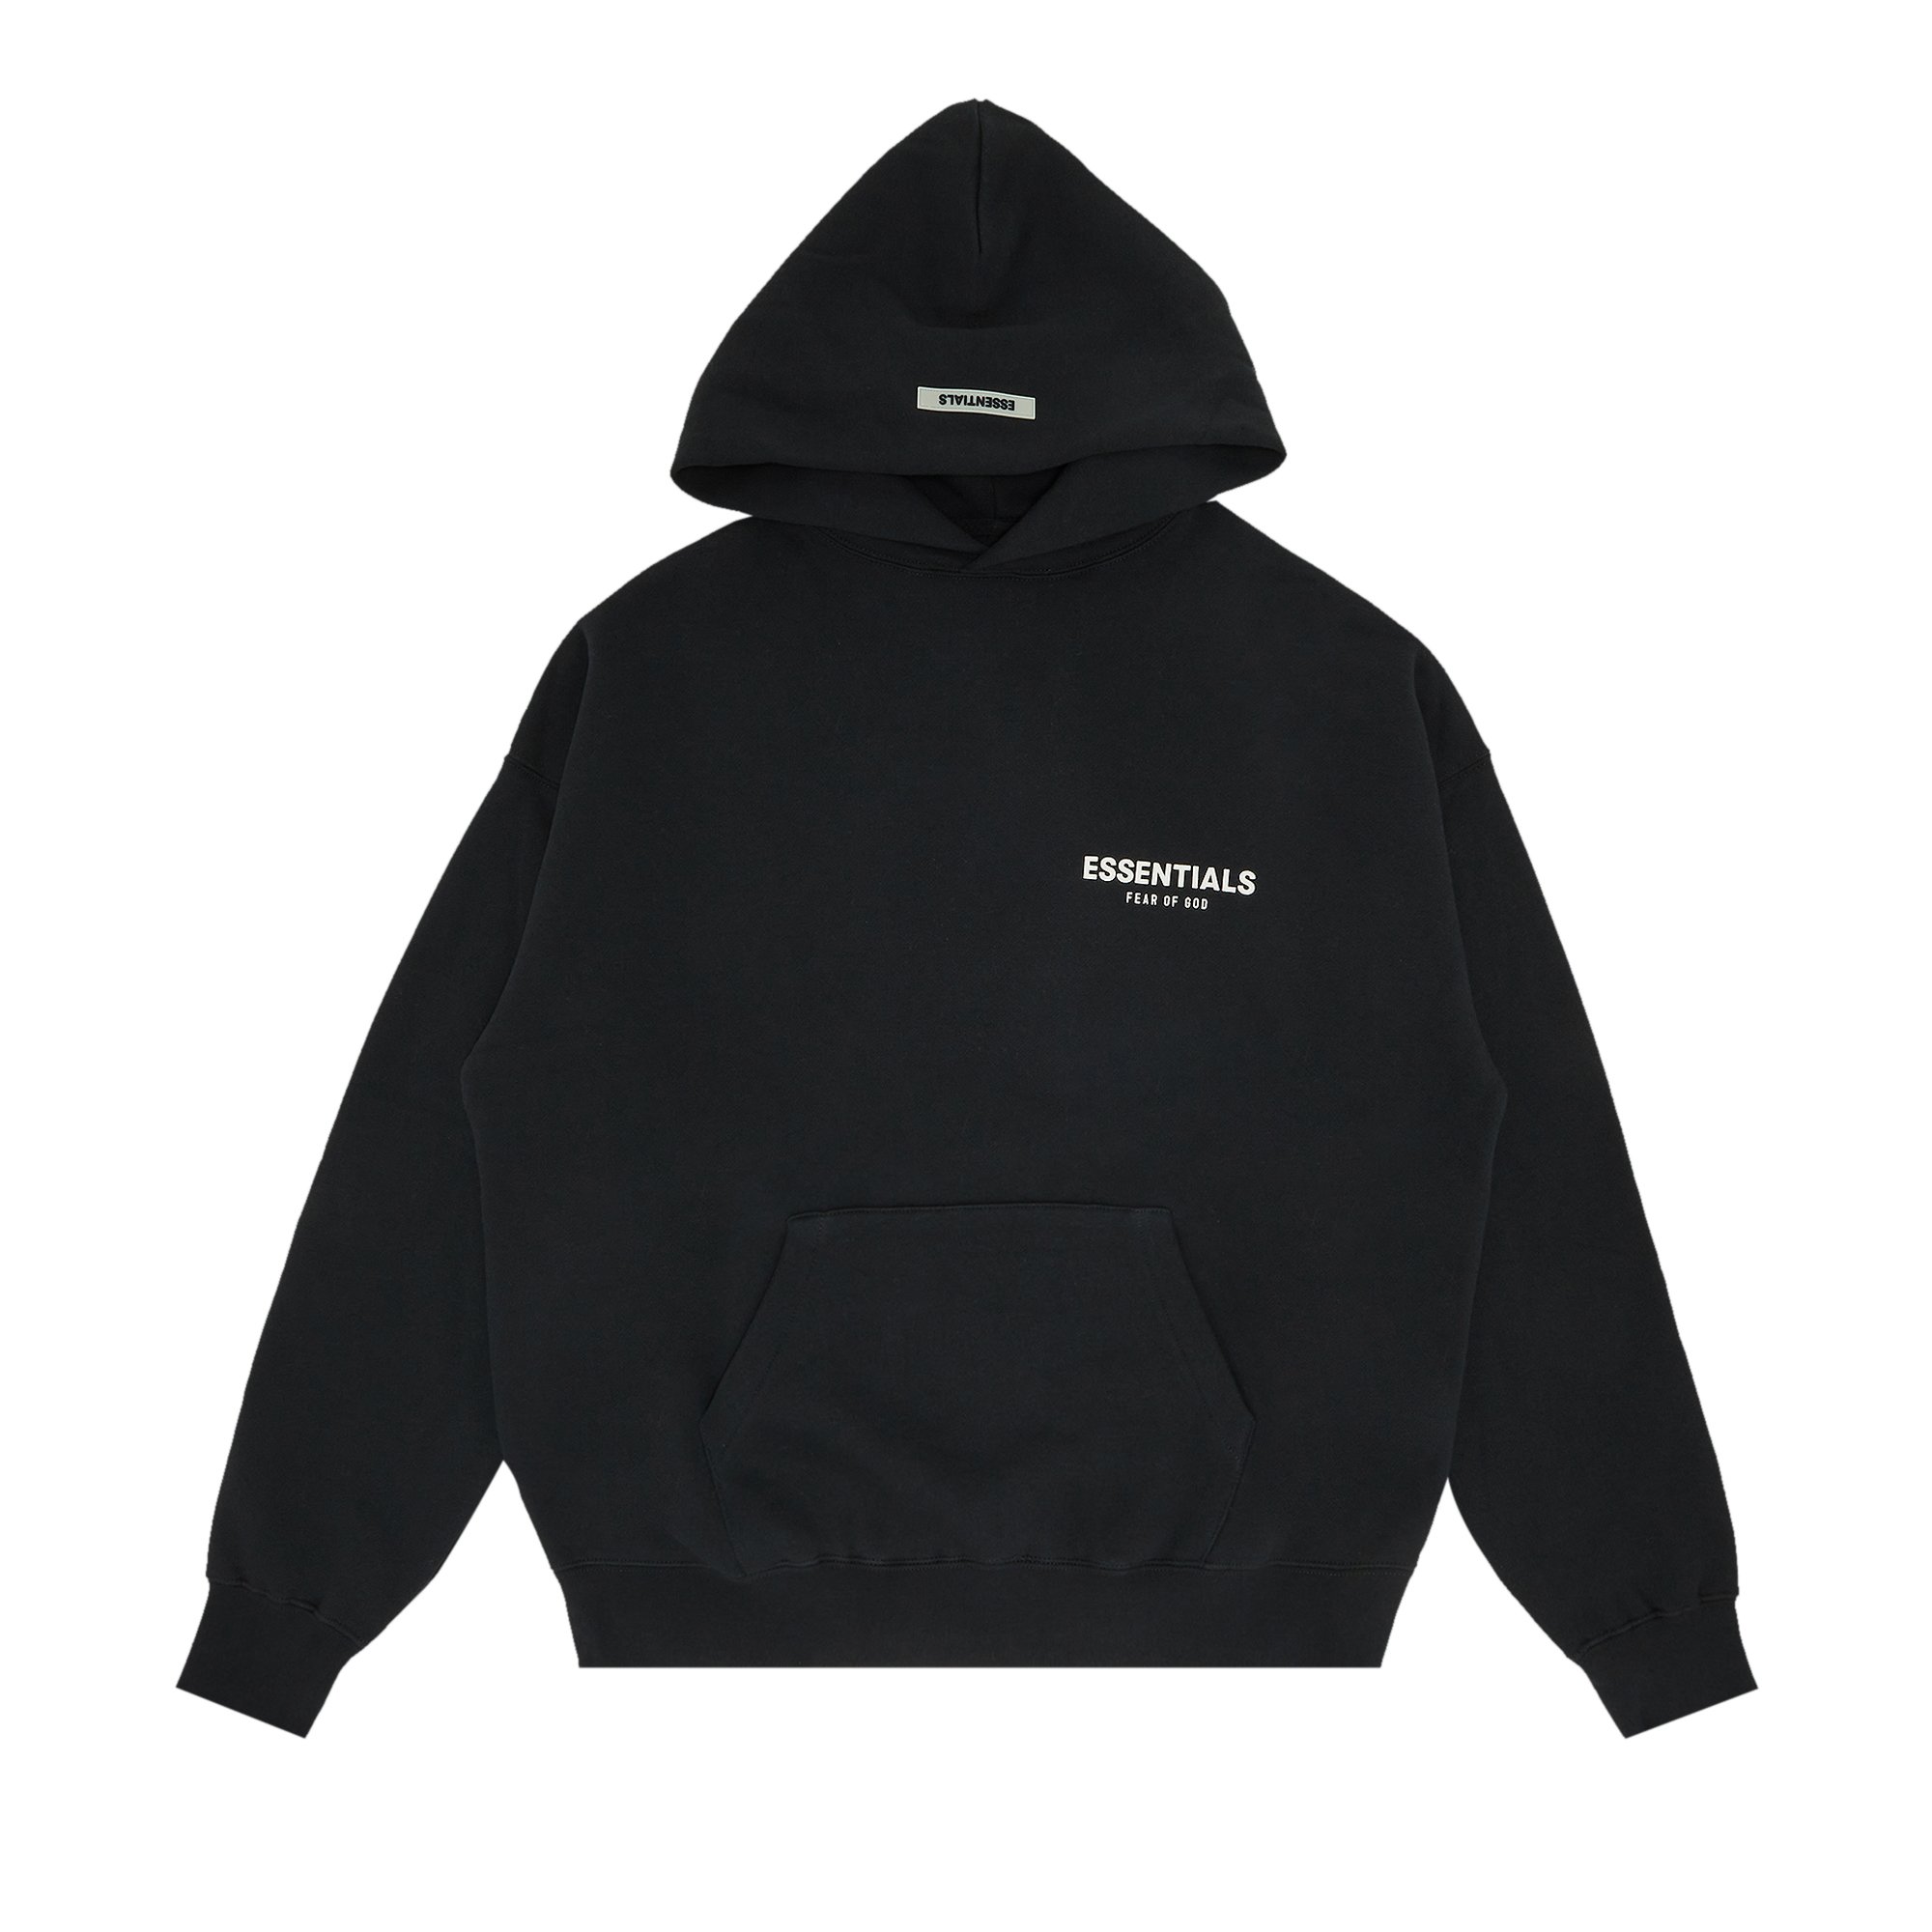 Buy Fear of God Essentials Photo Pullover Hoodie 'Black' - 0192